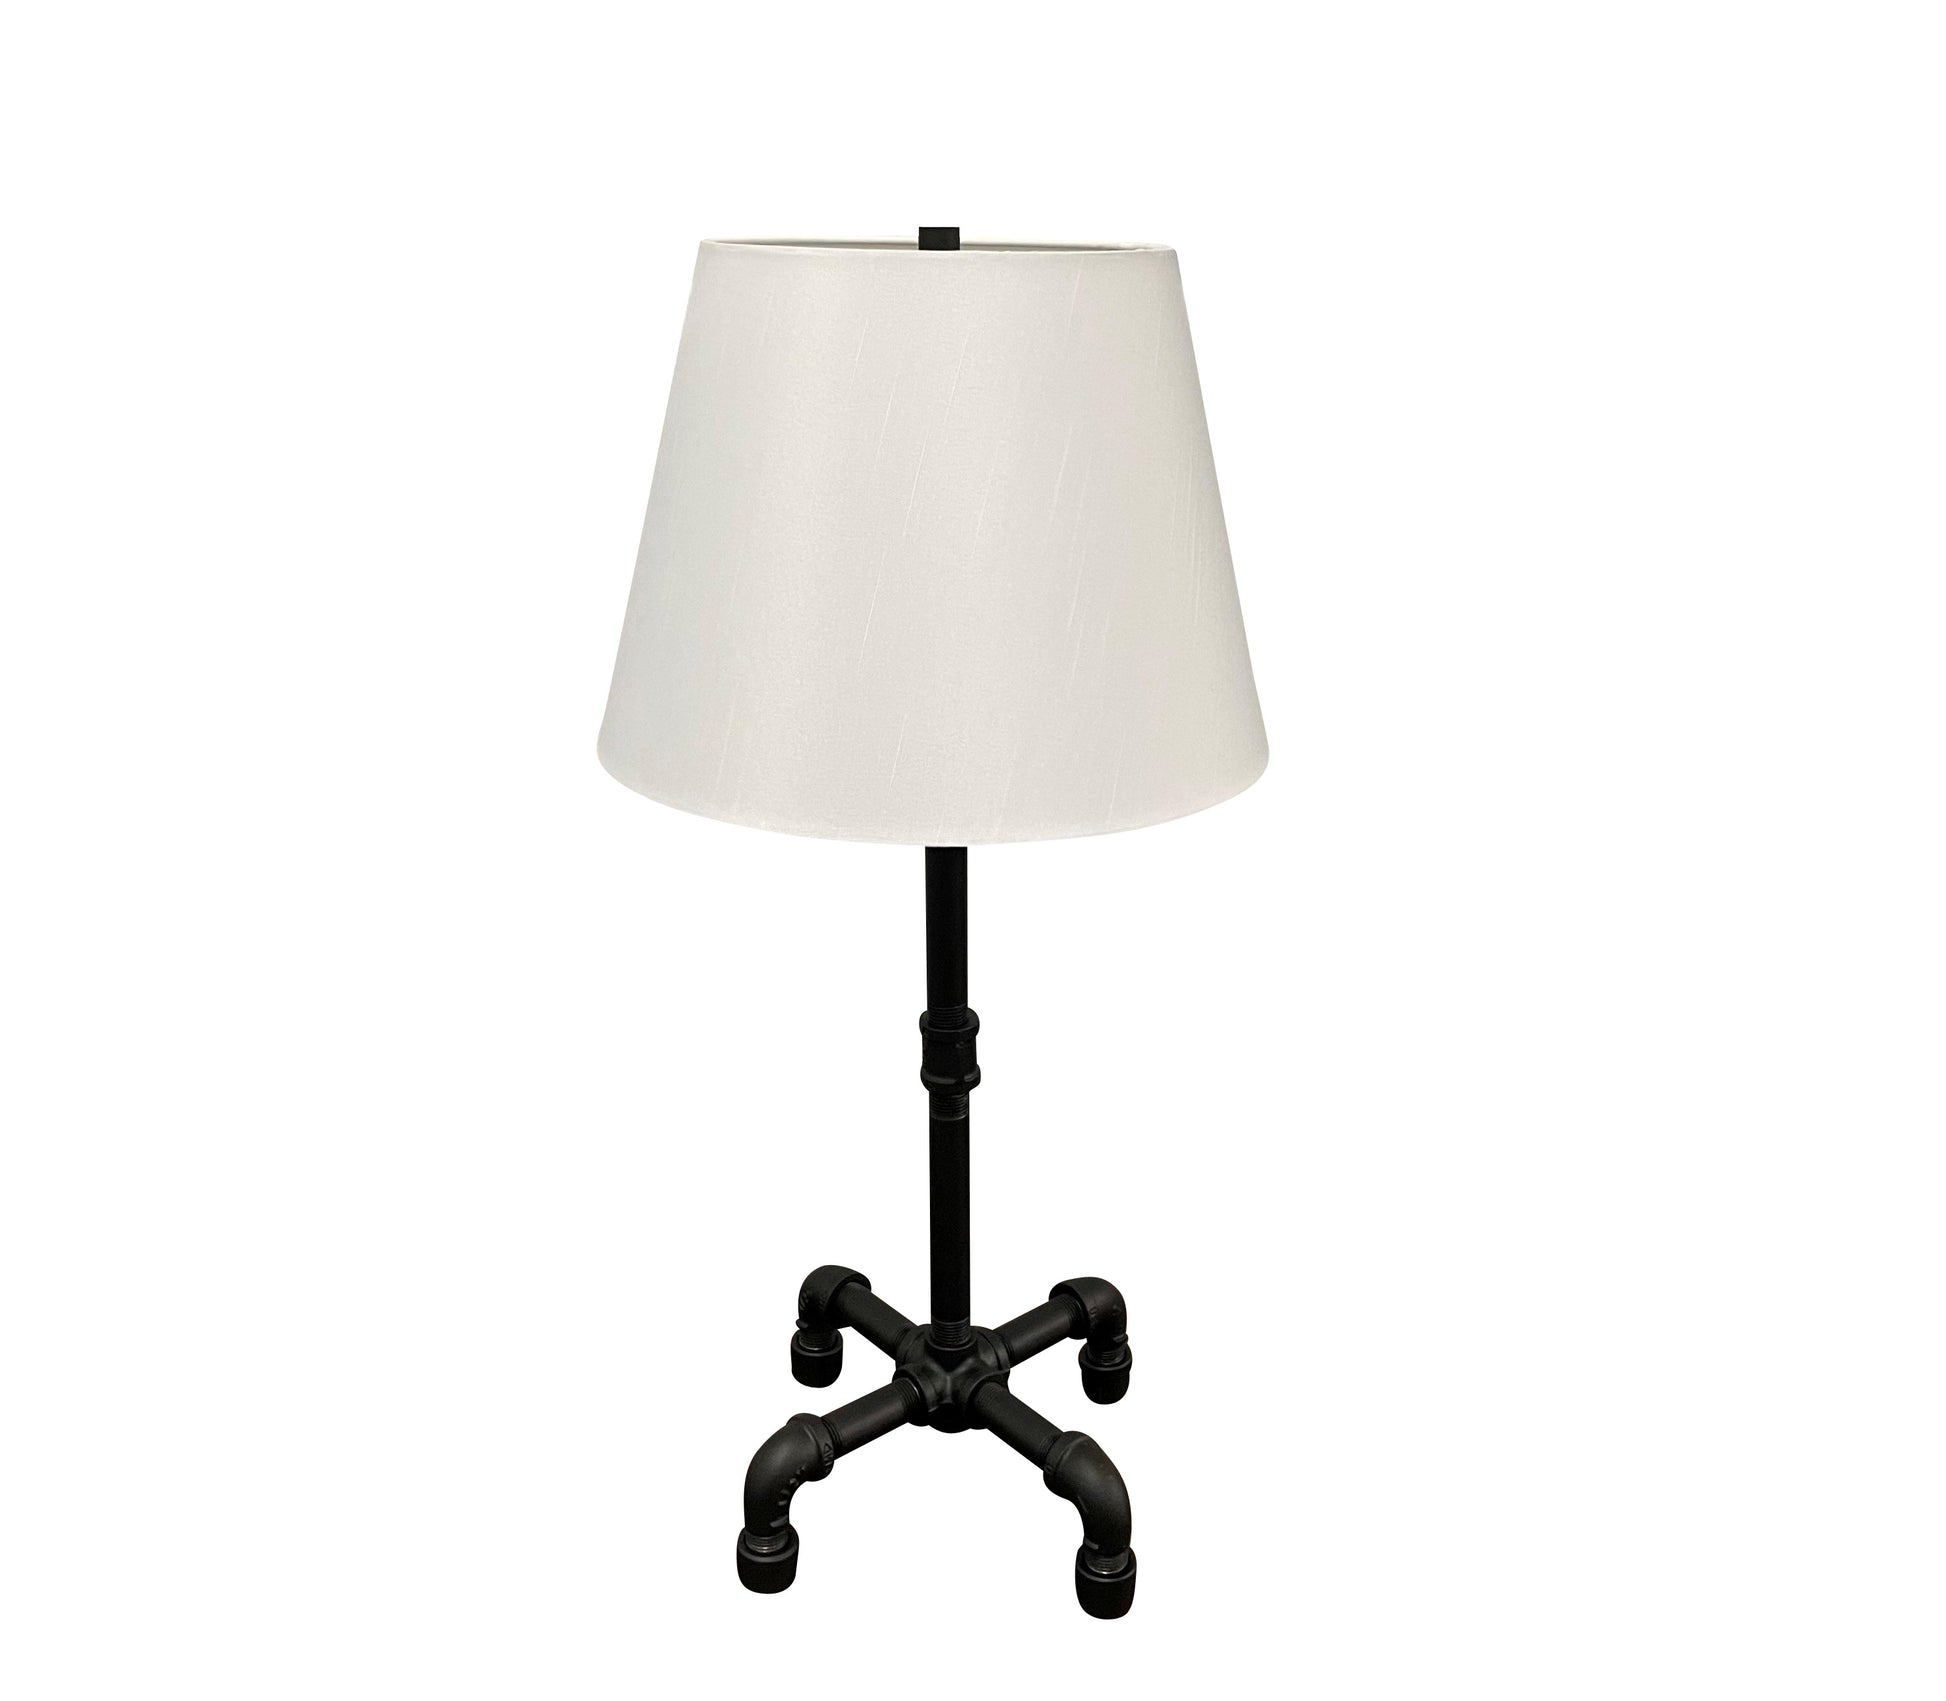 House of Troy Studio industrial black table lamp with fabric shade ST650-BLK